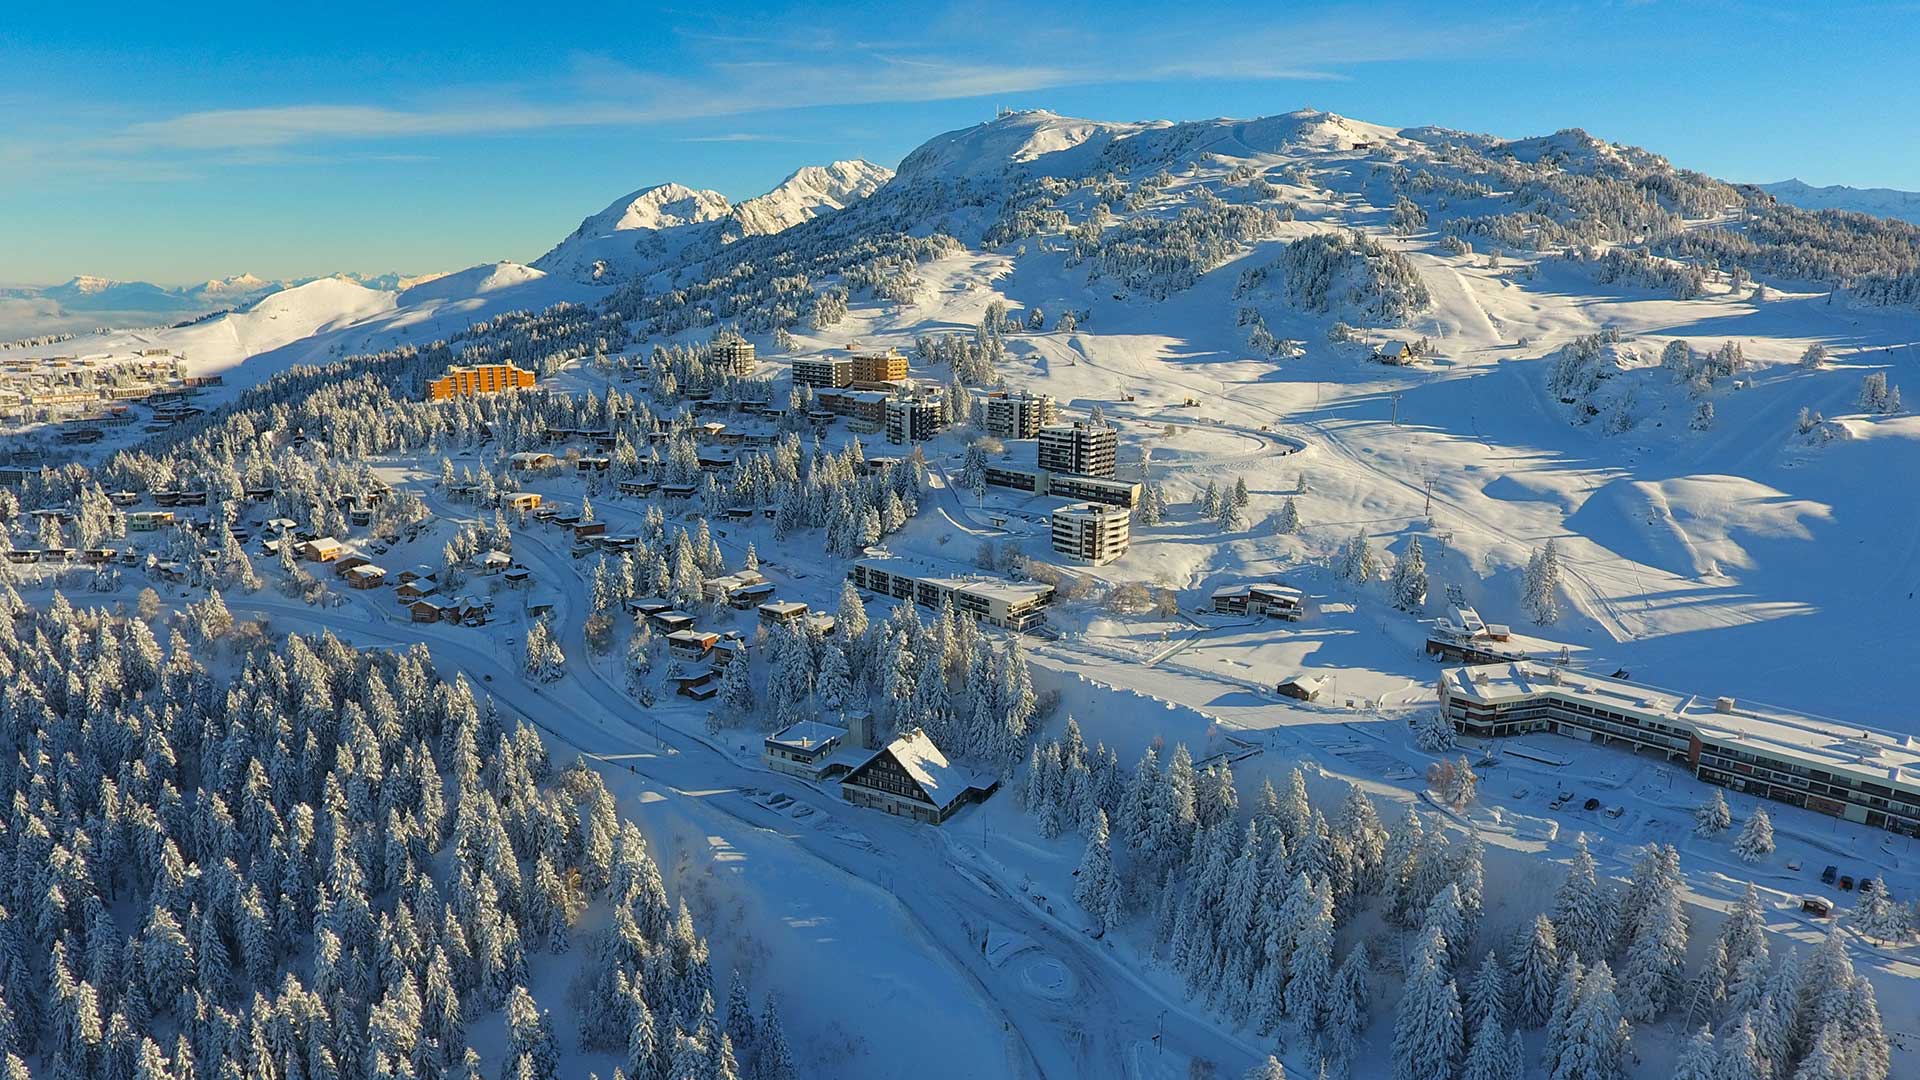 Chamrousse station recoin roche bachat arselle ski montagne isère alpes france - © Aeolus Drone